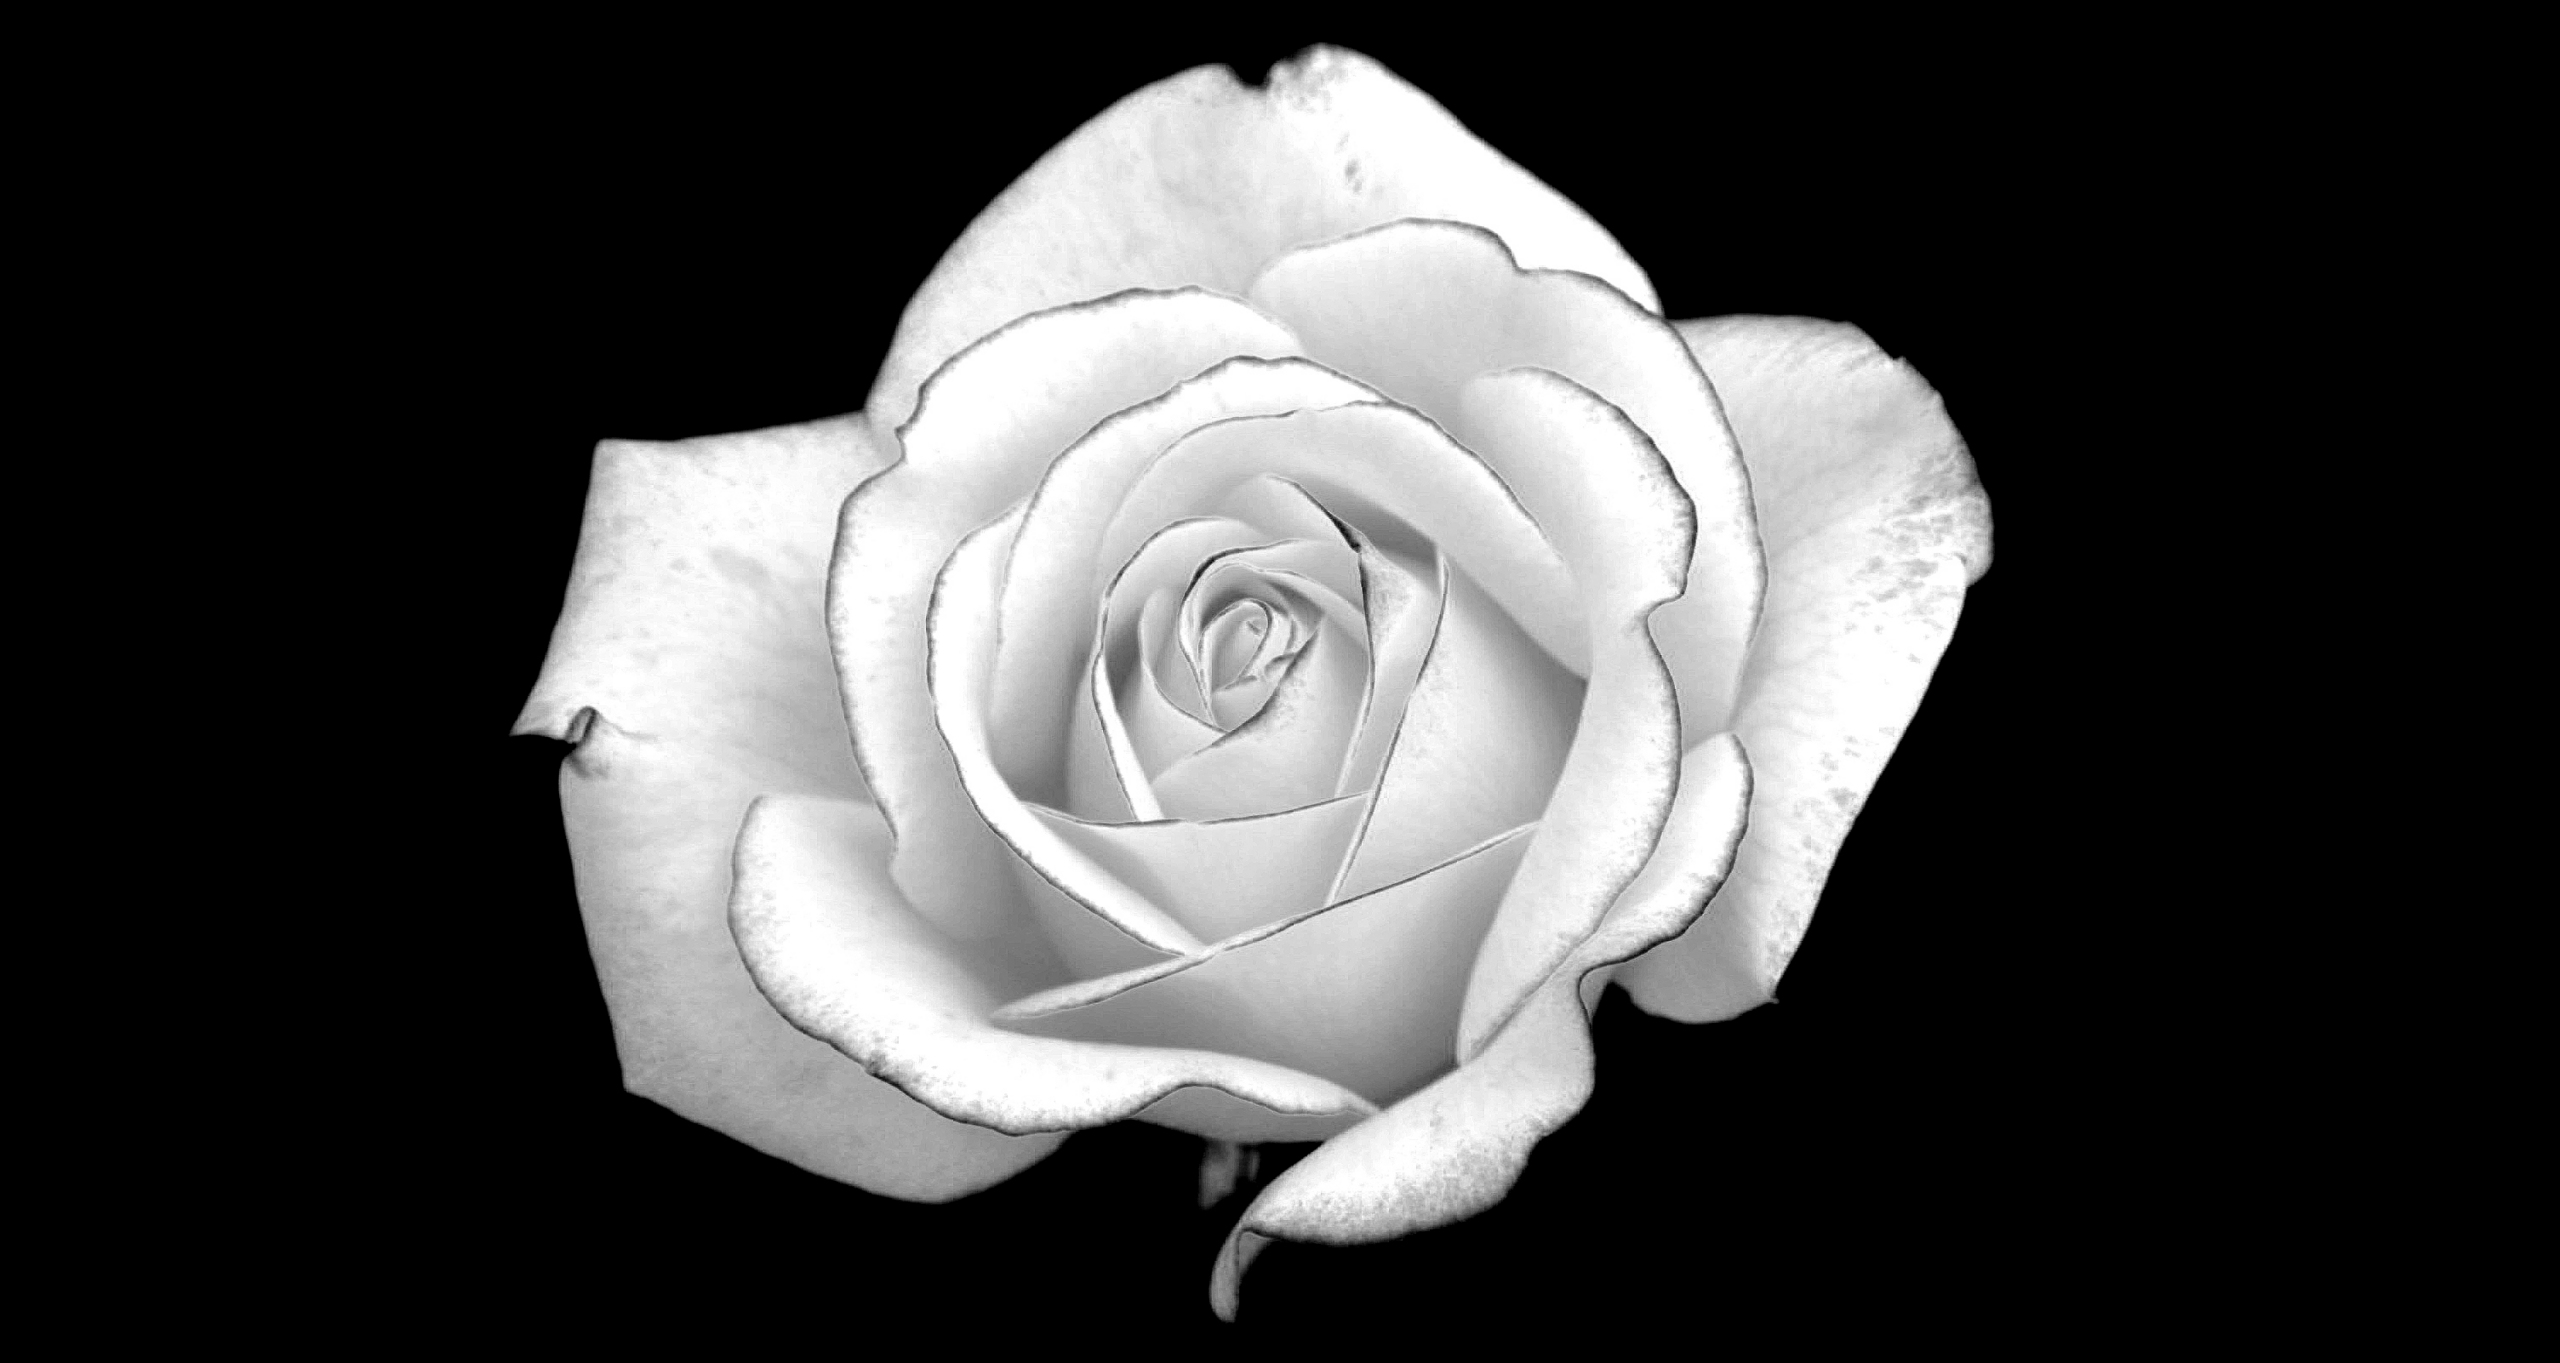 white-roses-mean-I-m-worthy-of-you-roses-29560925-2560-1363.jpg